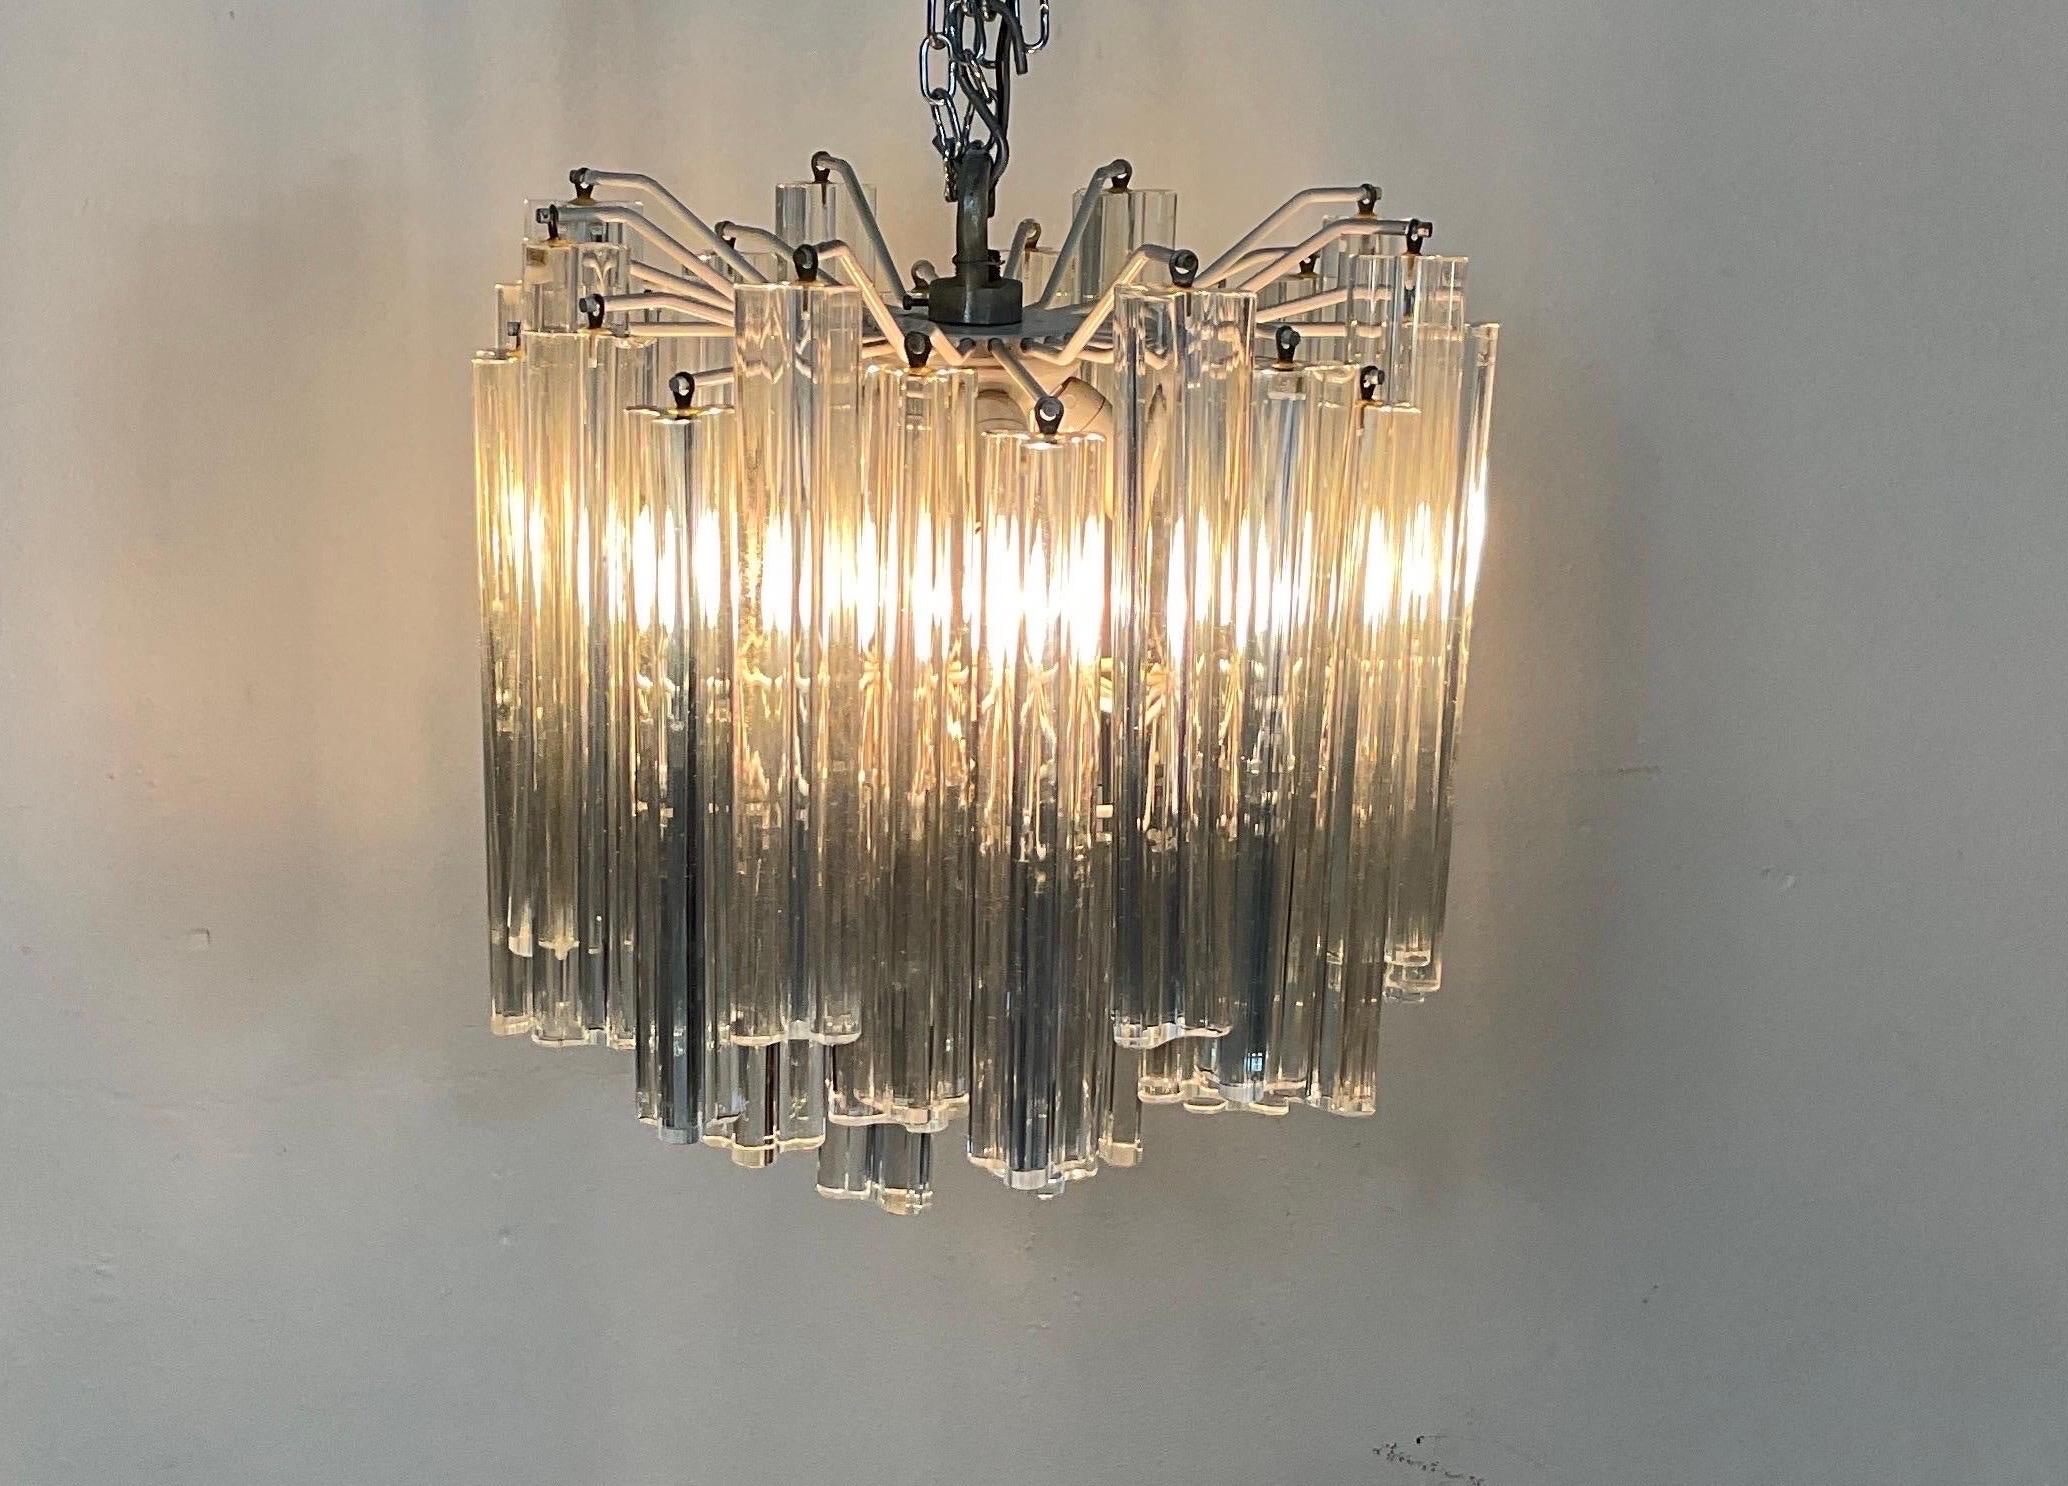 Fantastic Murano glass chandelier and a brass structure. Chandelier in good condition and complete. Attributable to the famous Italian designer Paolo Venini.